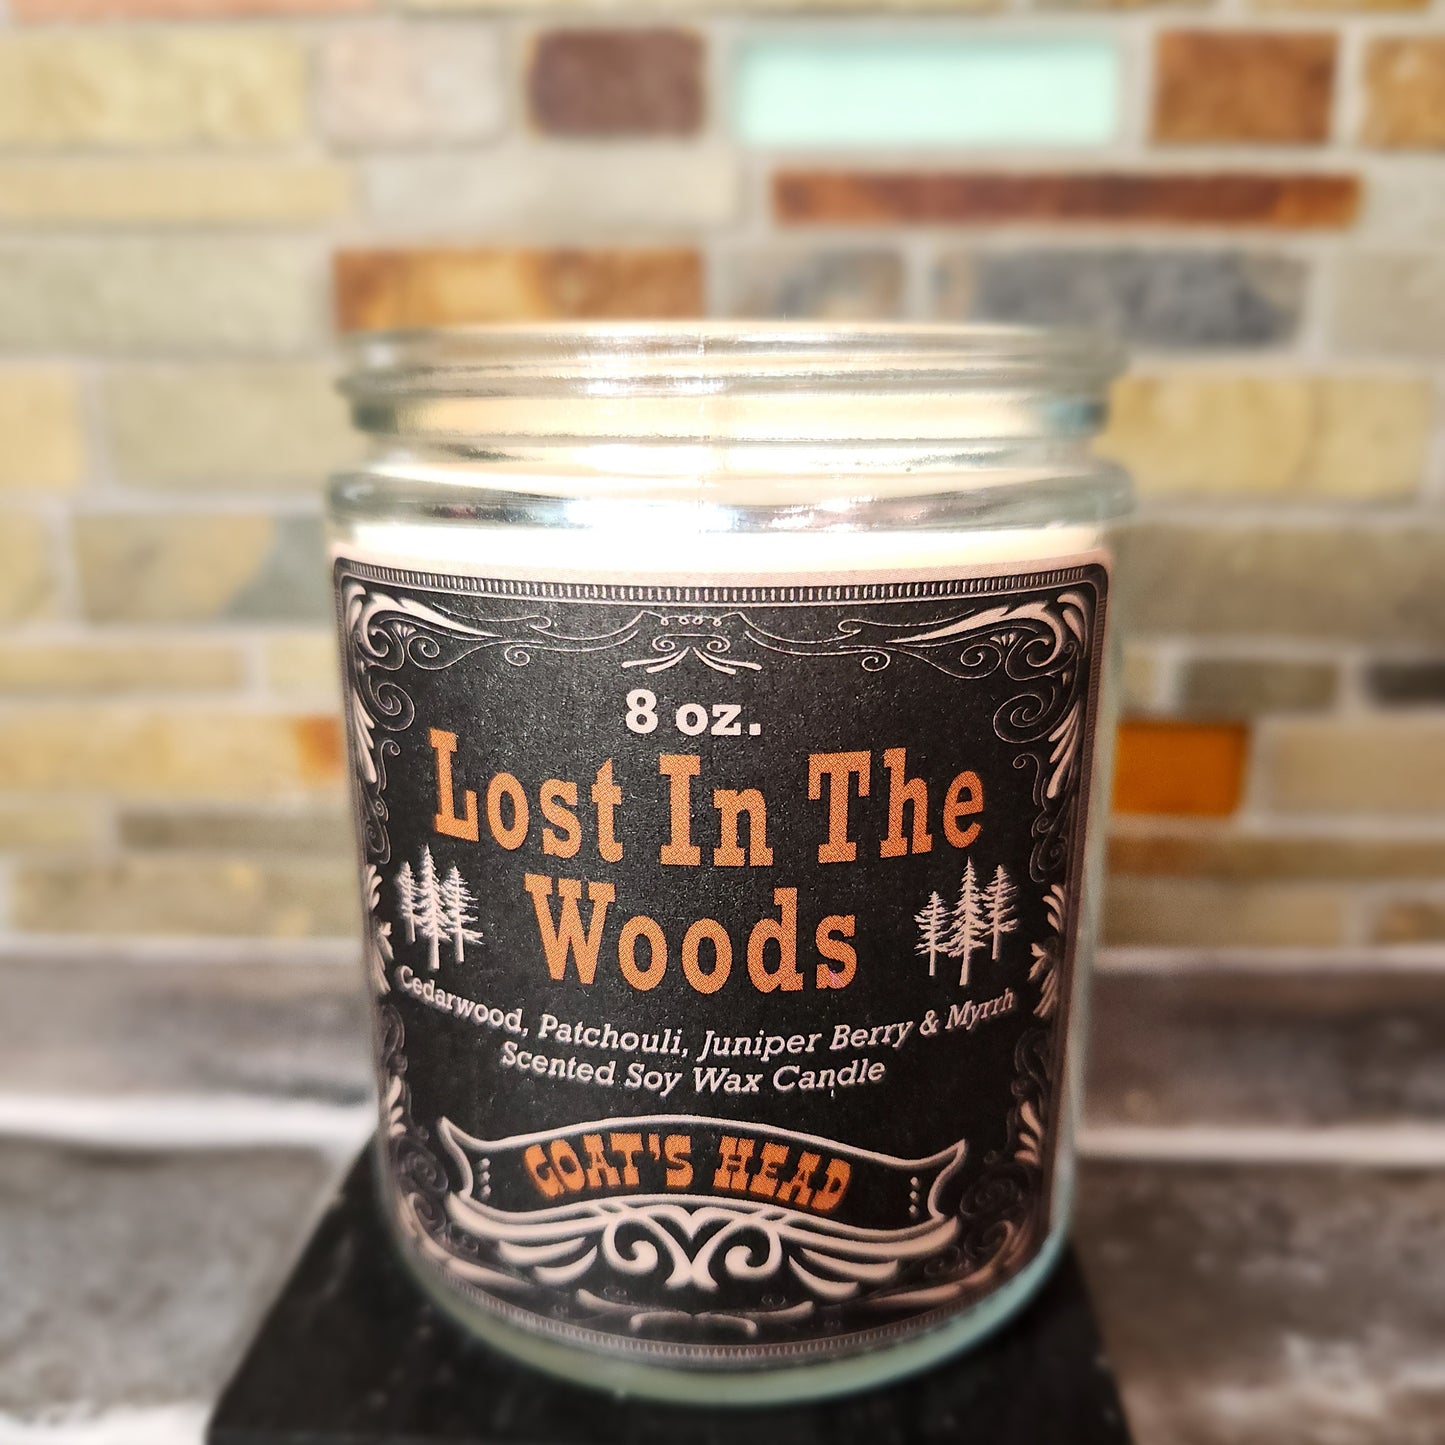 "Lost in the Woods" 8 oz. Scented Soy Candle